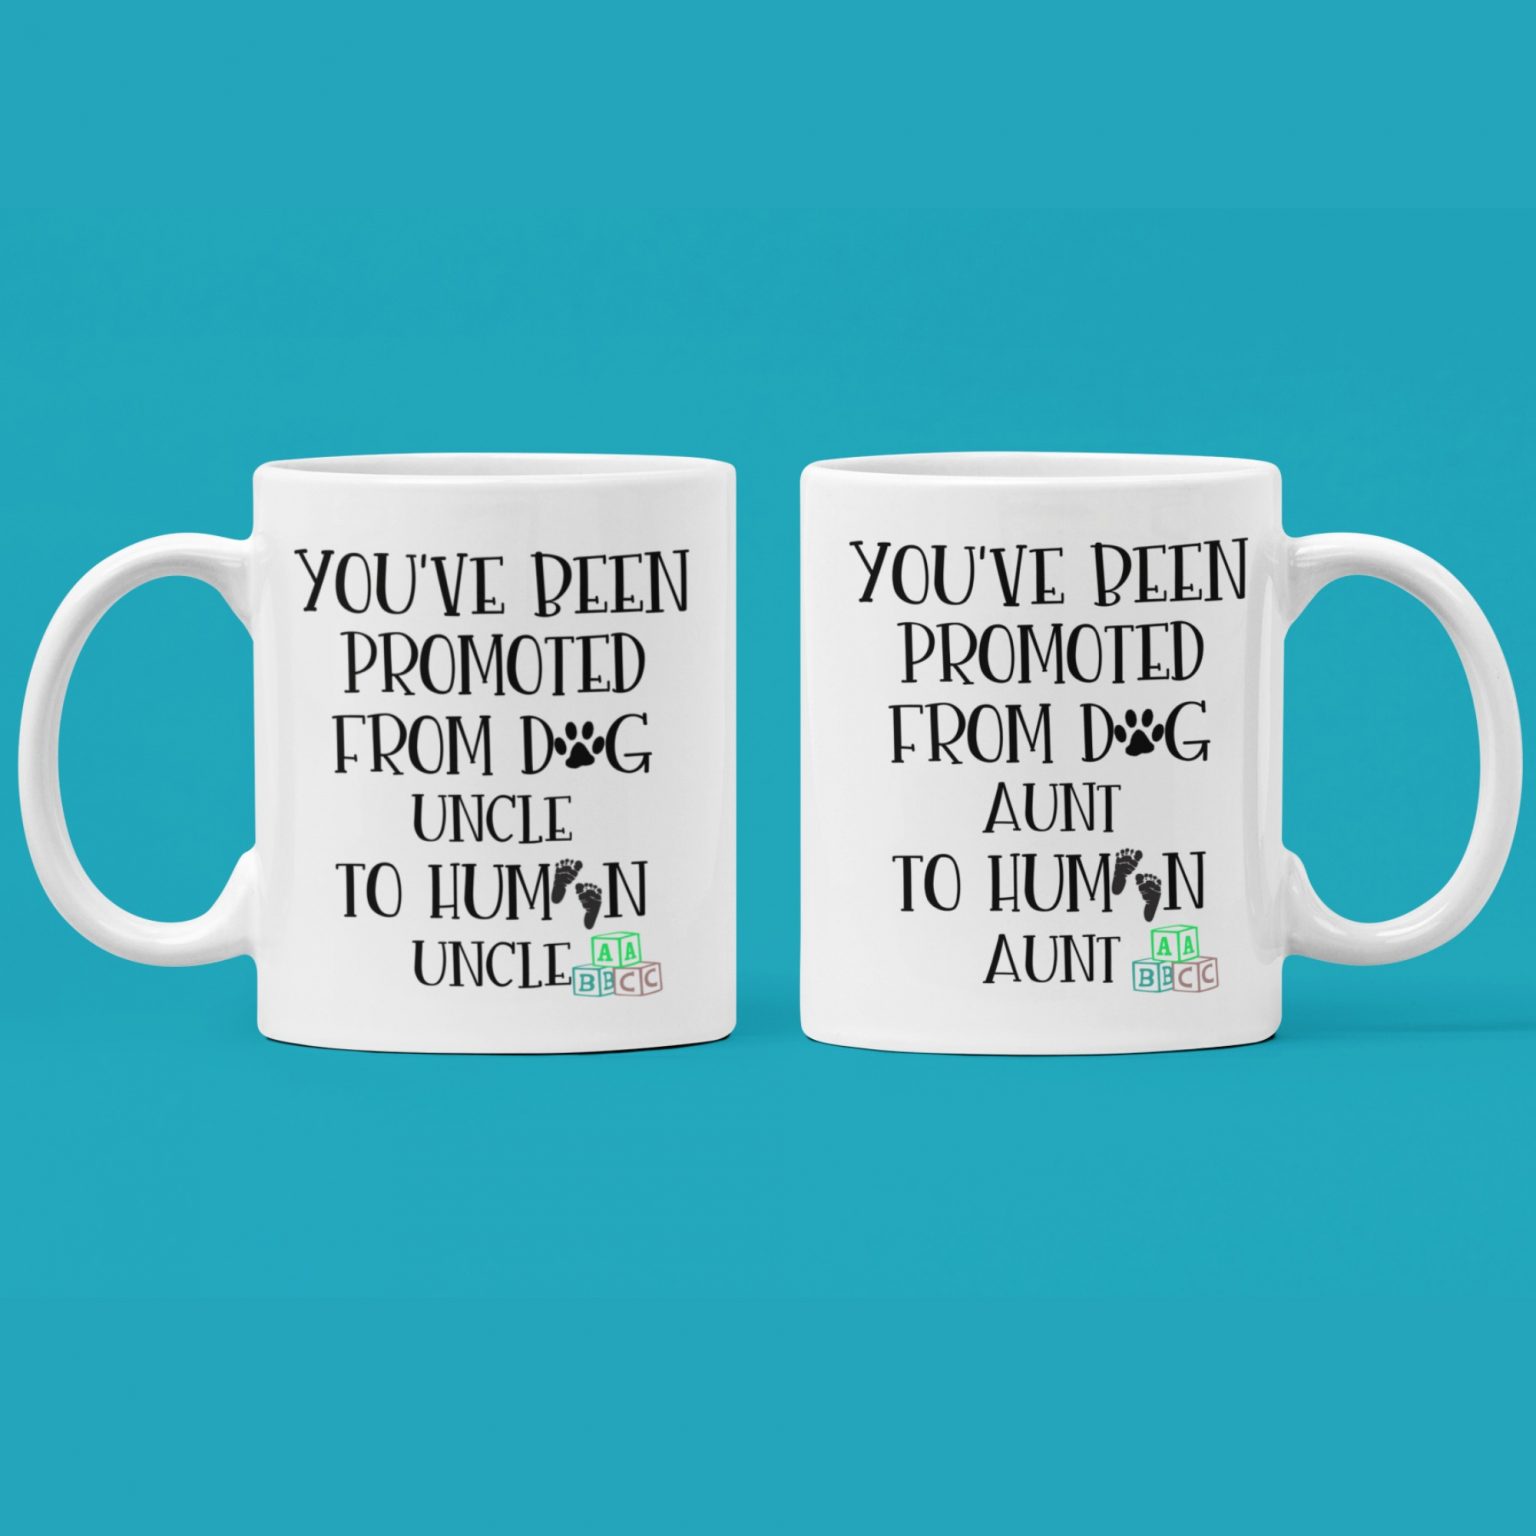 New Aunt and New Uncle Mug Set Pregnancy Announcement